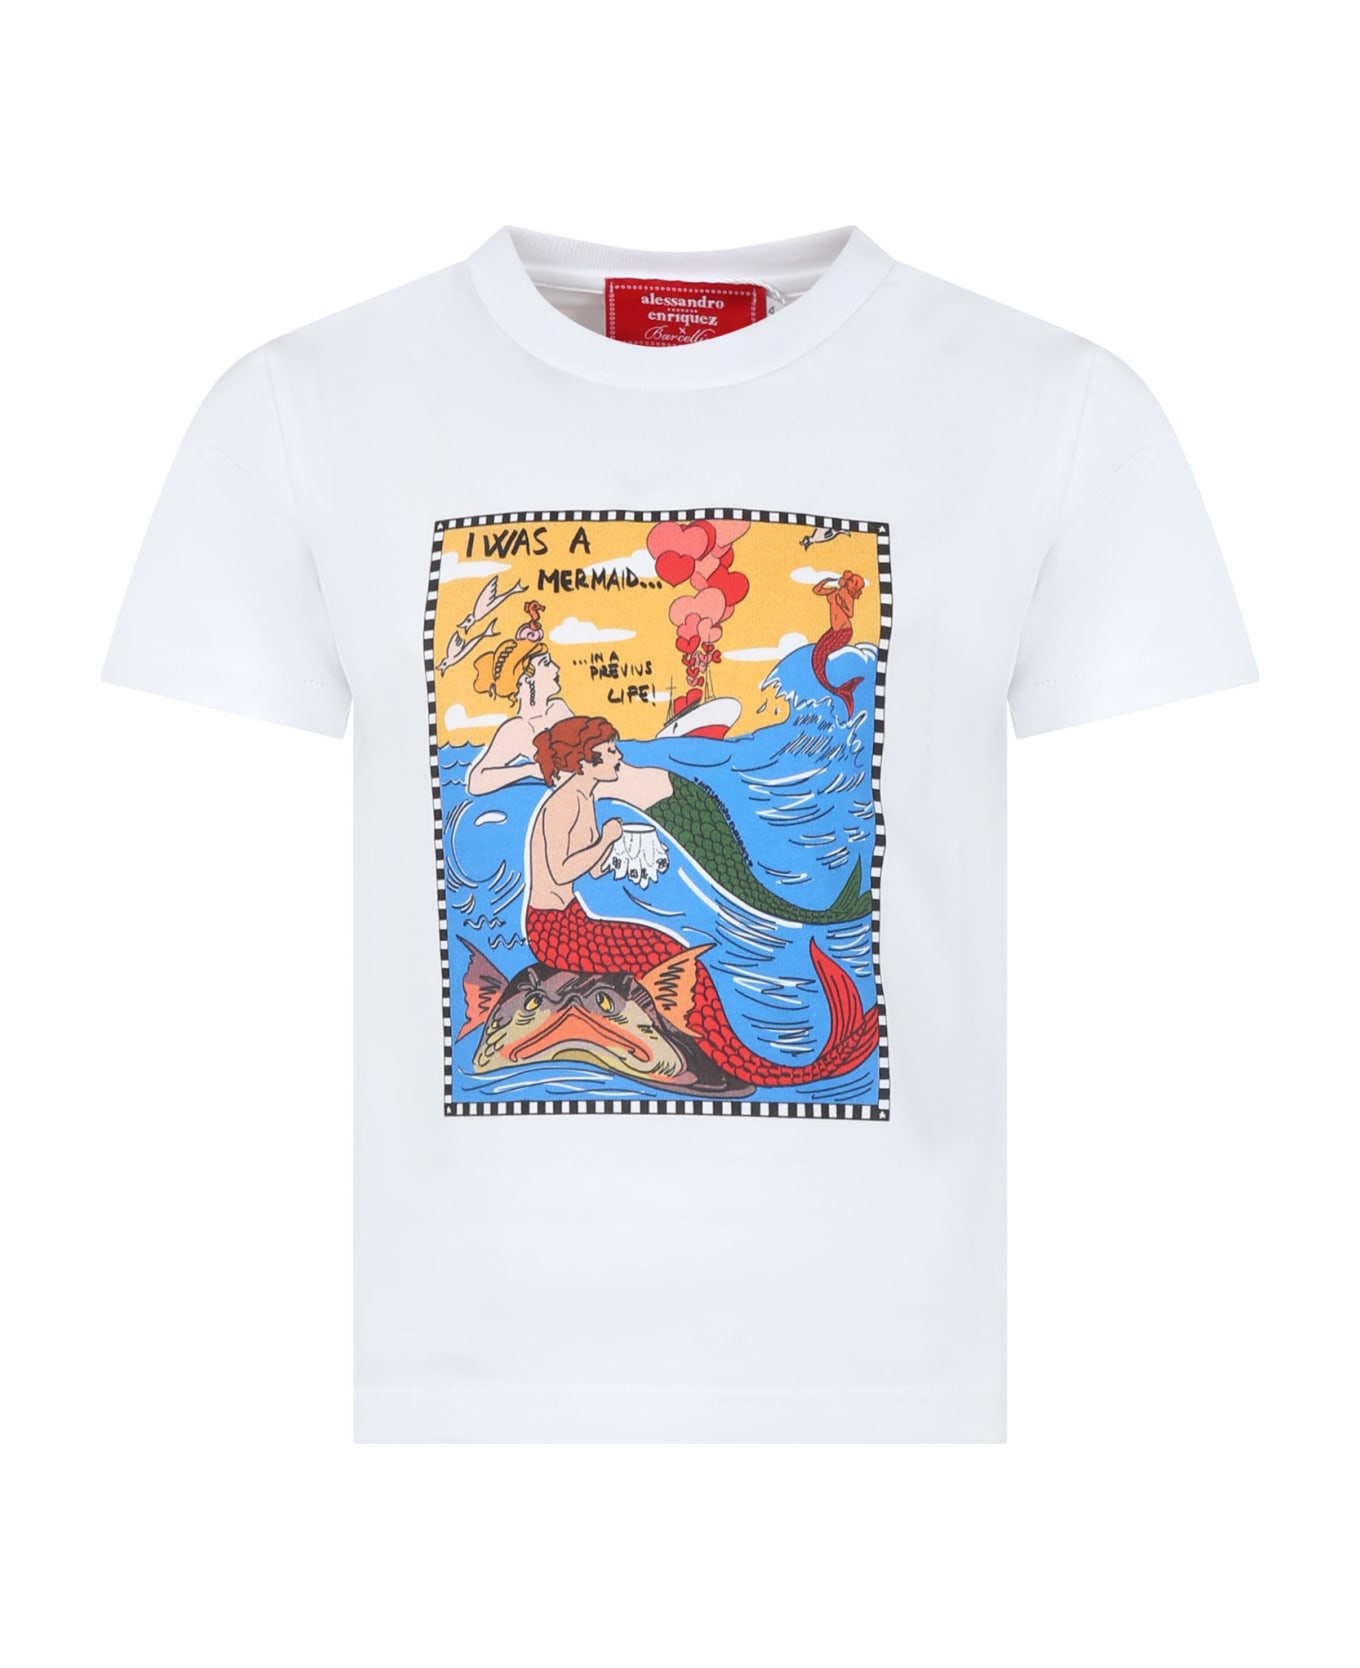 Alessandro Enriquez White T-shirt For Girl With Mermaid Print And Writing - White